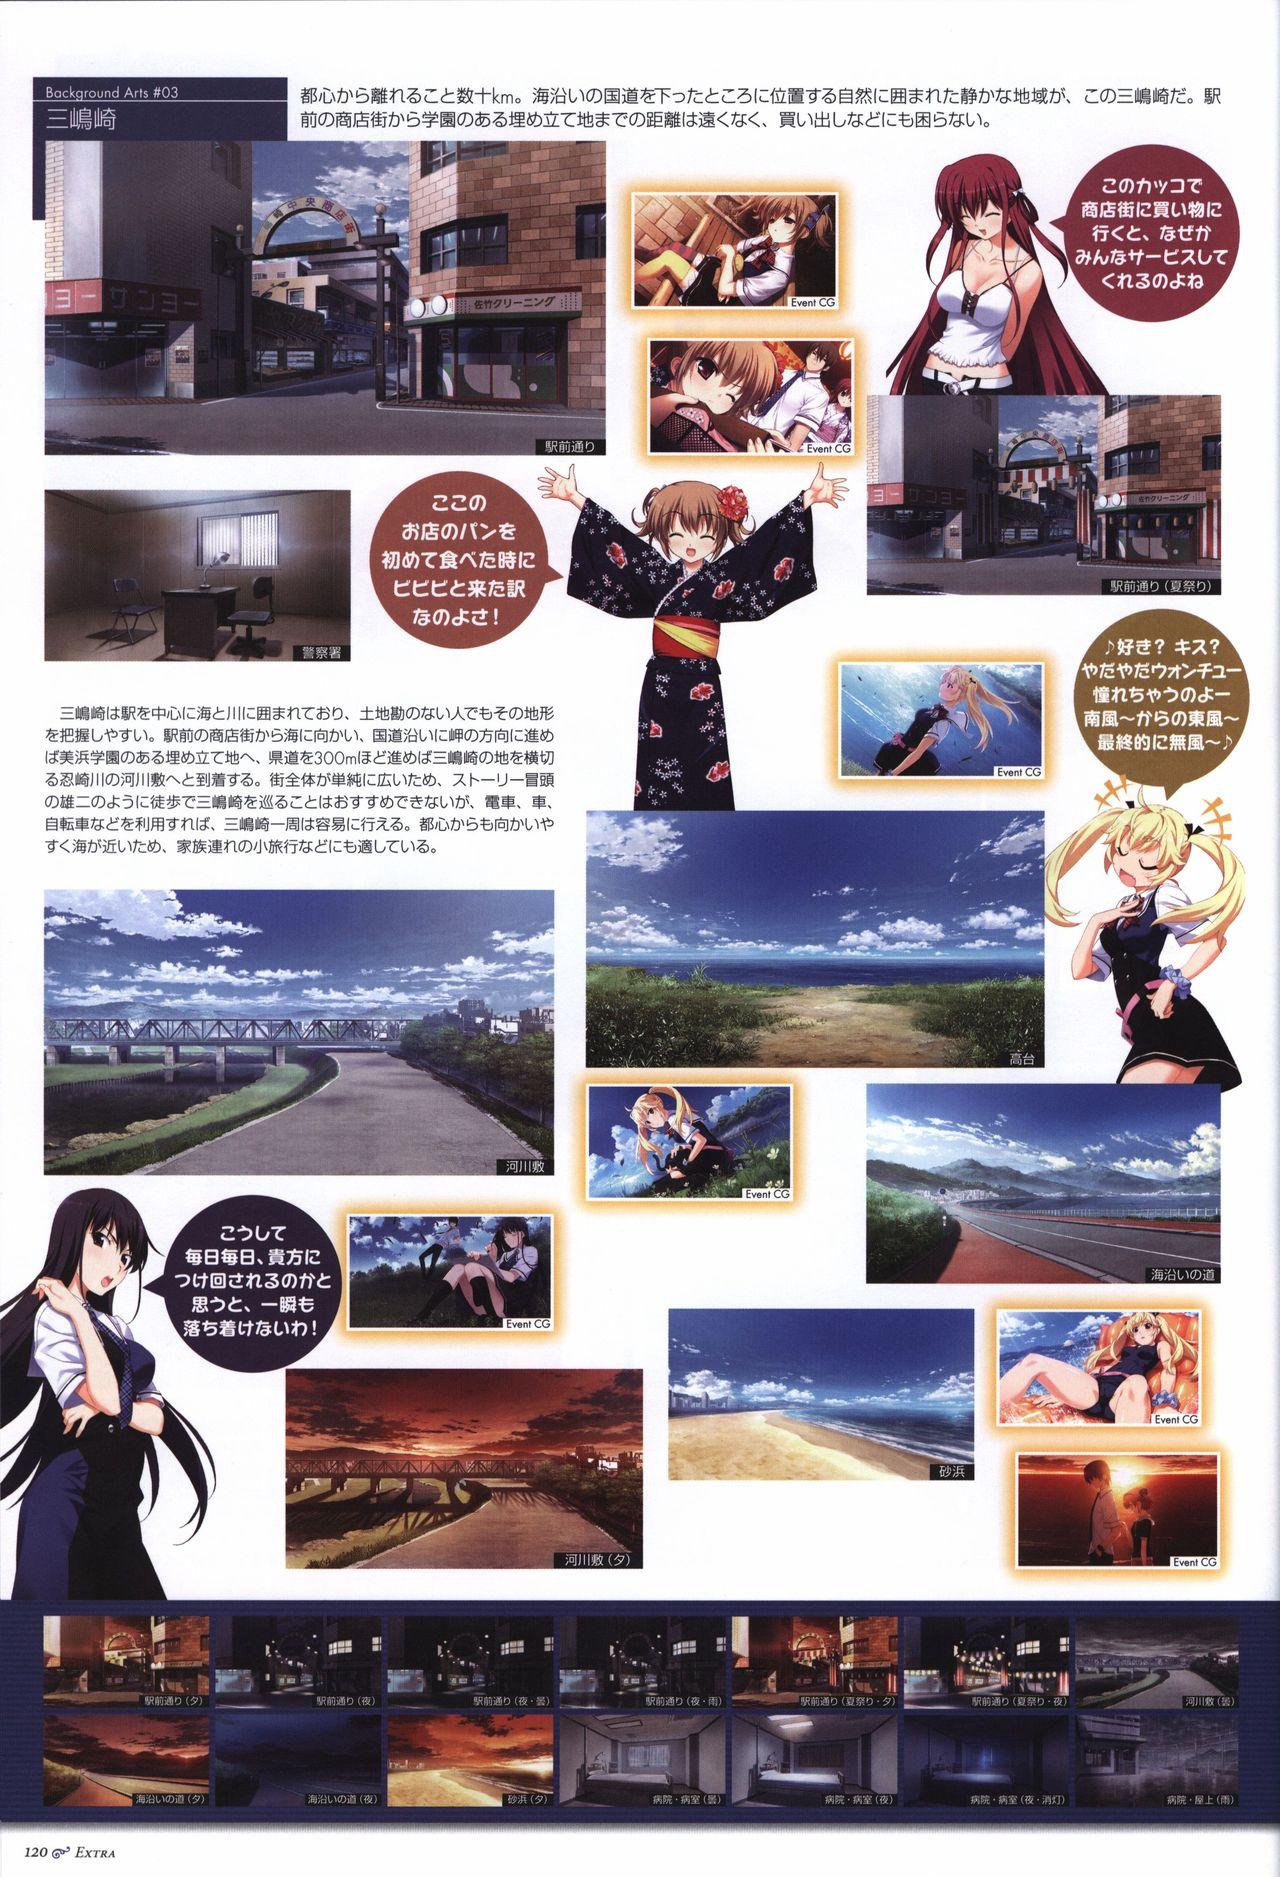 The Fruit of Grisaia Visual FanBook 120